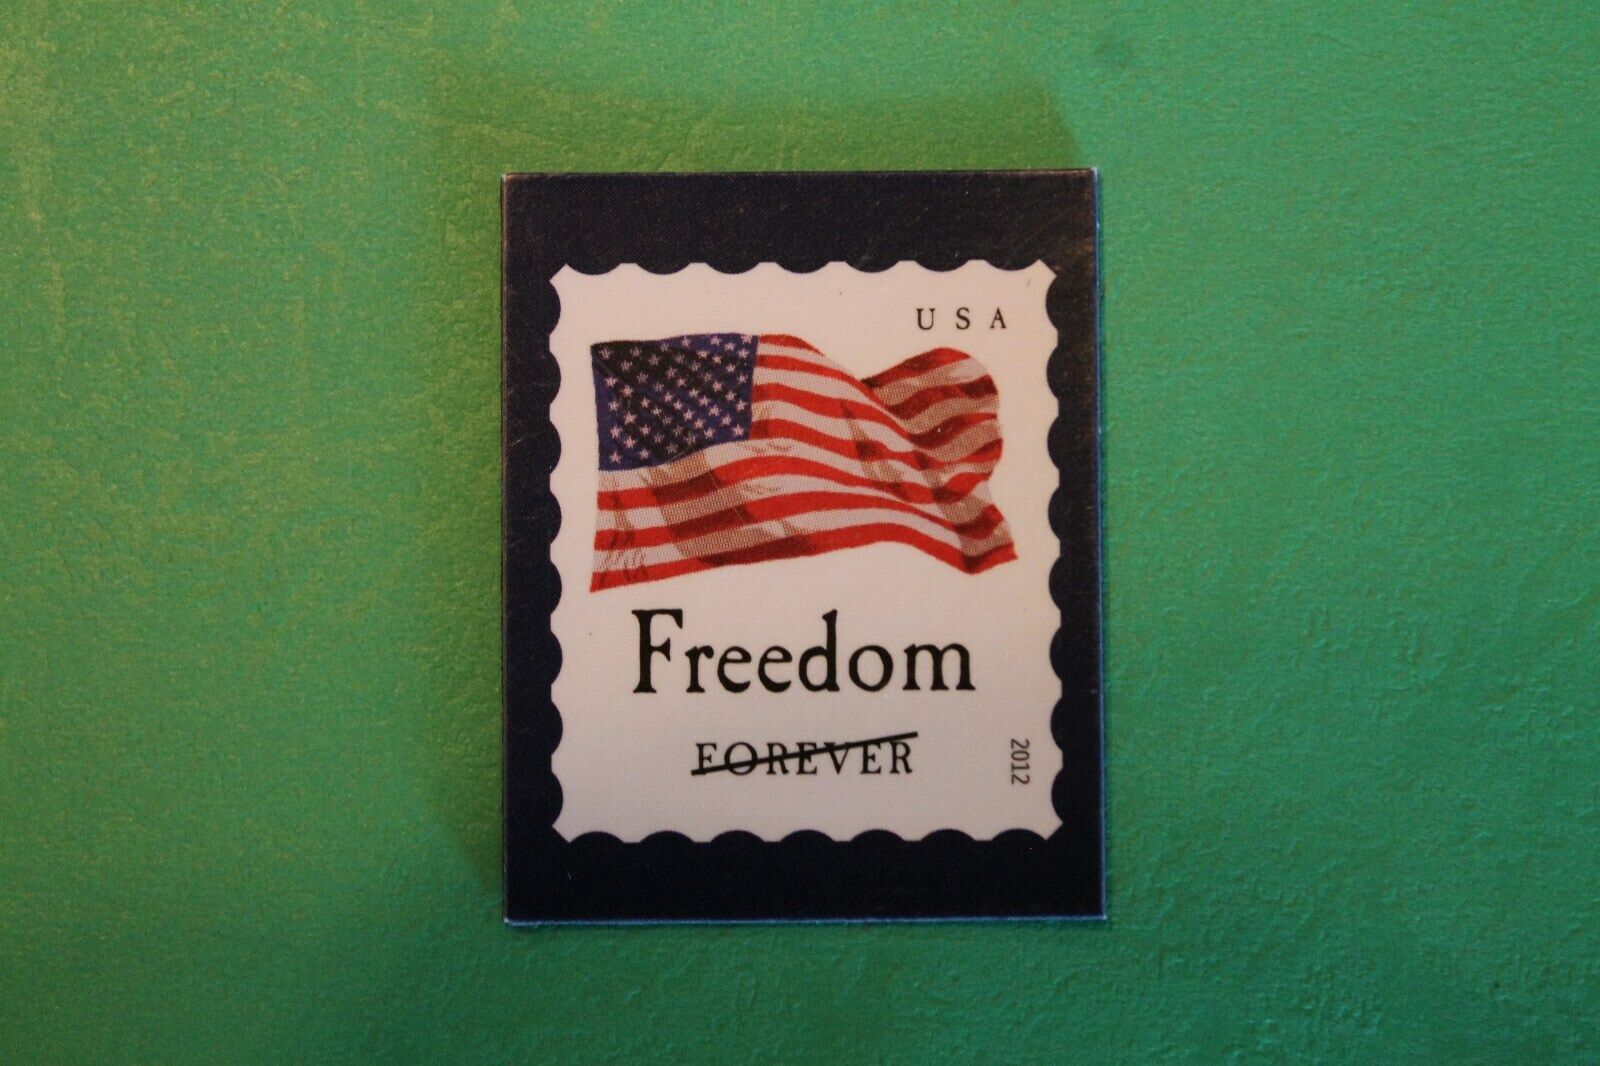 Usps Promo Magnetic Stamp - Four Flags Freedom / Usa Forever 2012 #4641 Military